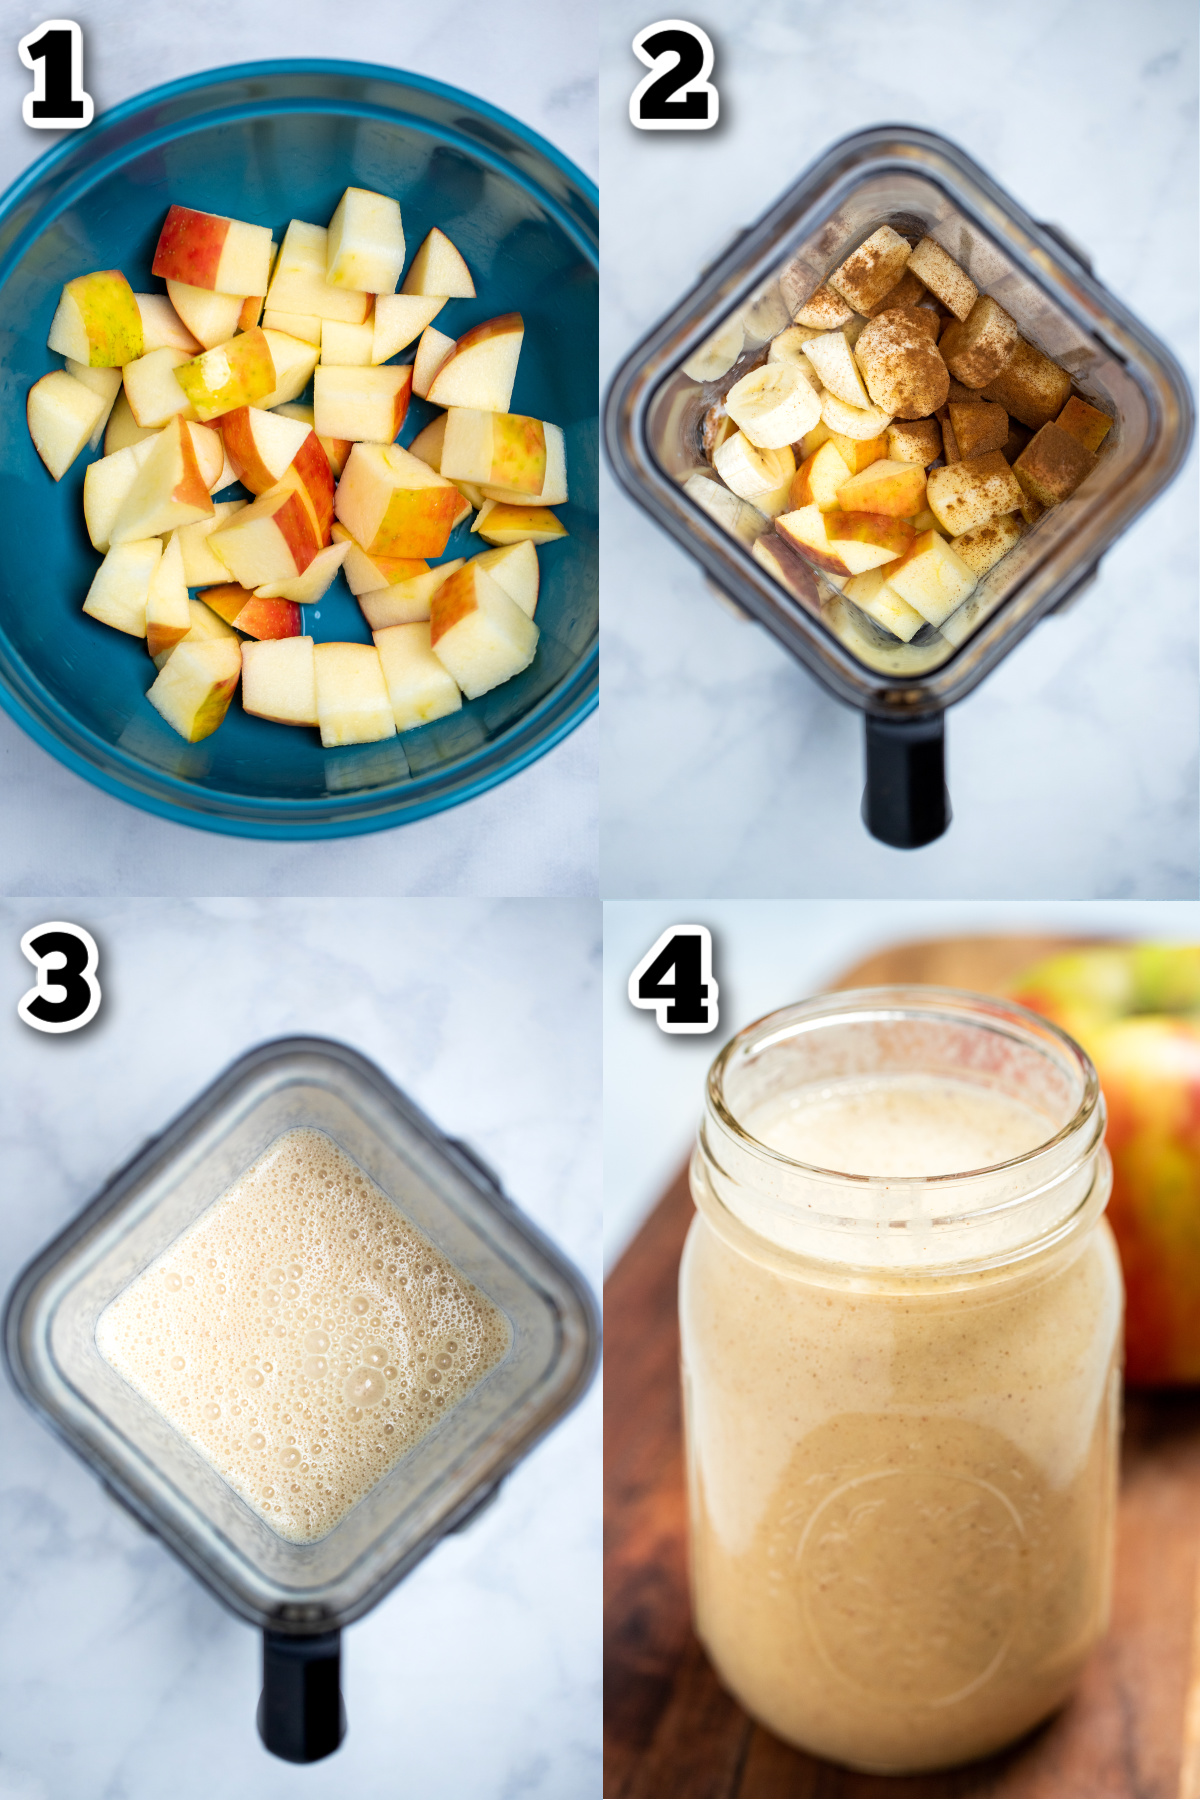 Step by step photos for how to make an apple banana smoothie.